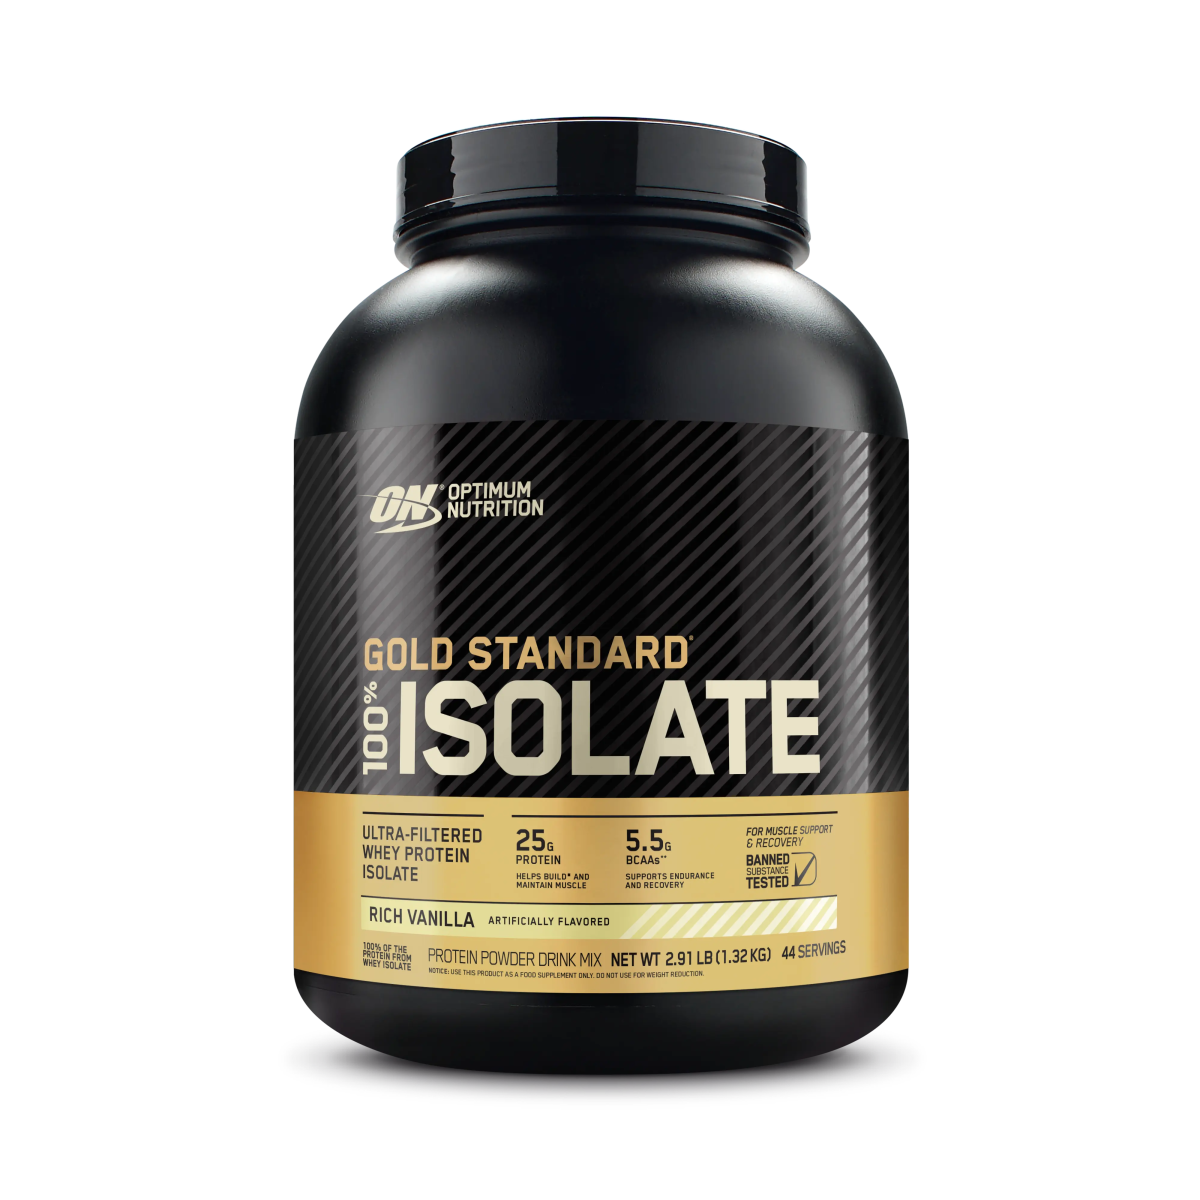 Optimum Nutrition - Gold Standard 100% Isolate Protein - Supplements - 44 Serves - The Cave Gym